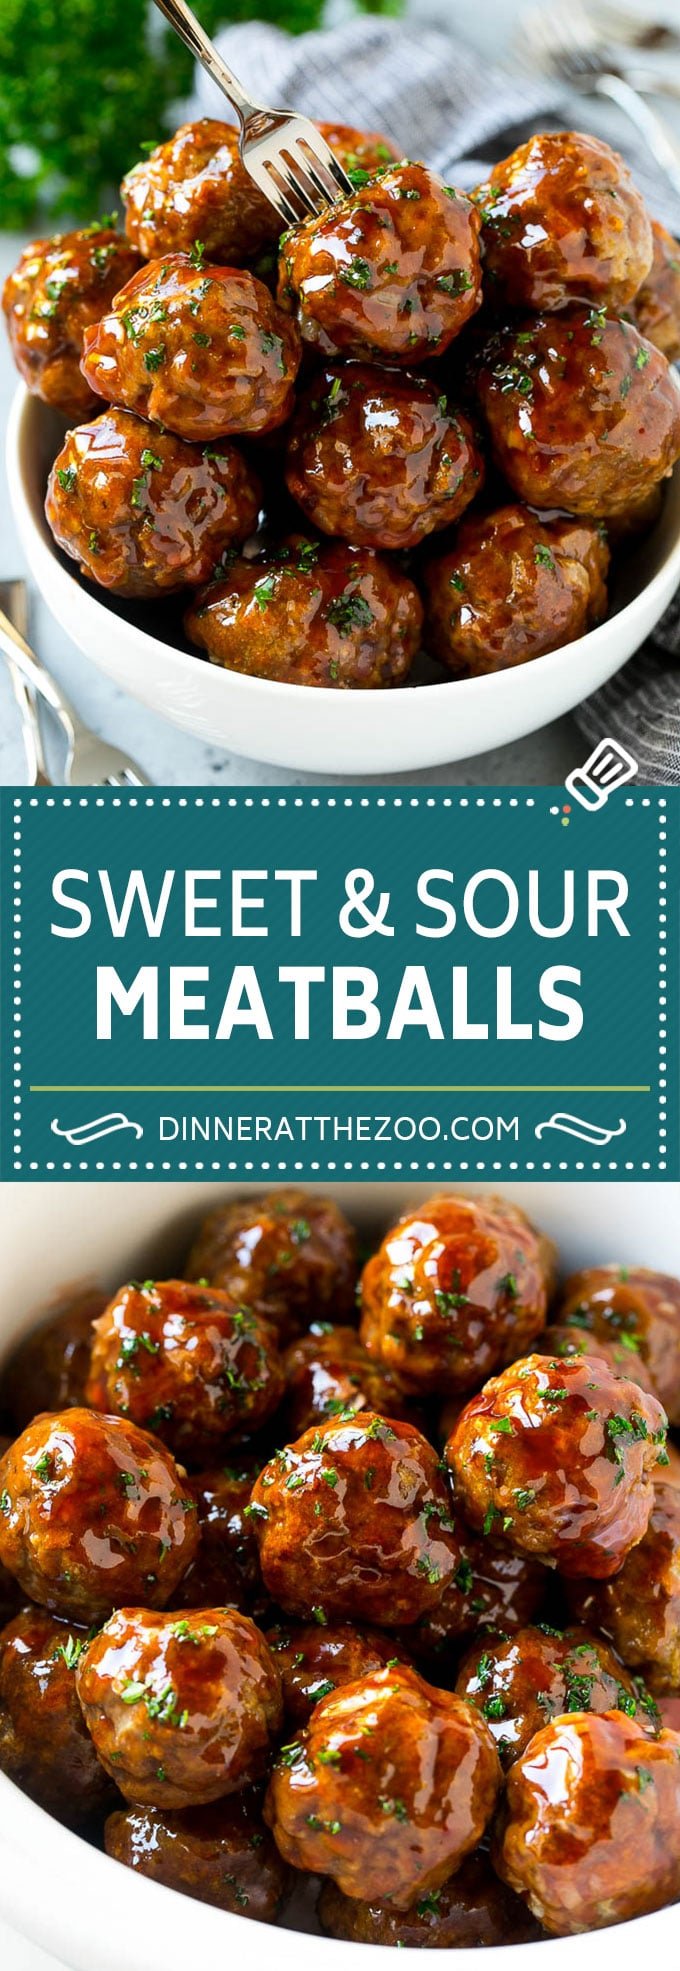 Sweet and Sour Meatballs Recipe | Slow Cooker Meatballs | Crockpot Meatballs | Cocktail Meatballs #meatballs #beef #slowcooker #crockpot #dinner #appetizer #dinneratthezoo